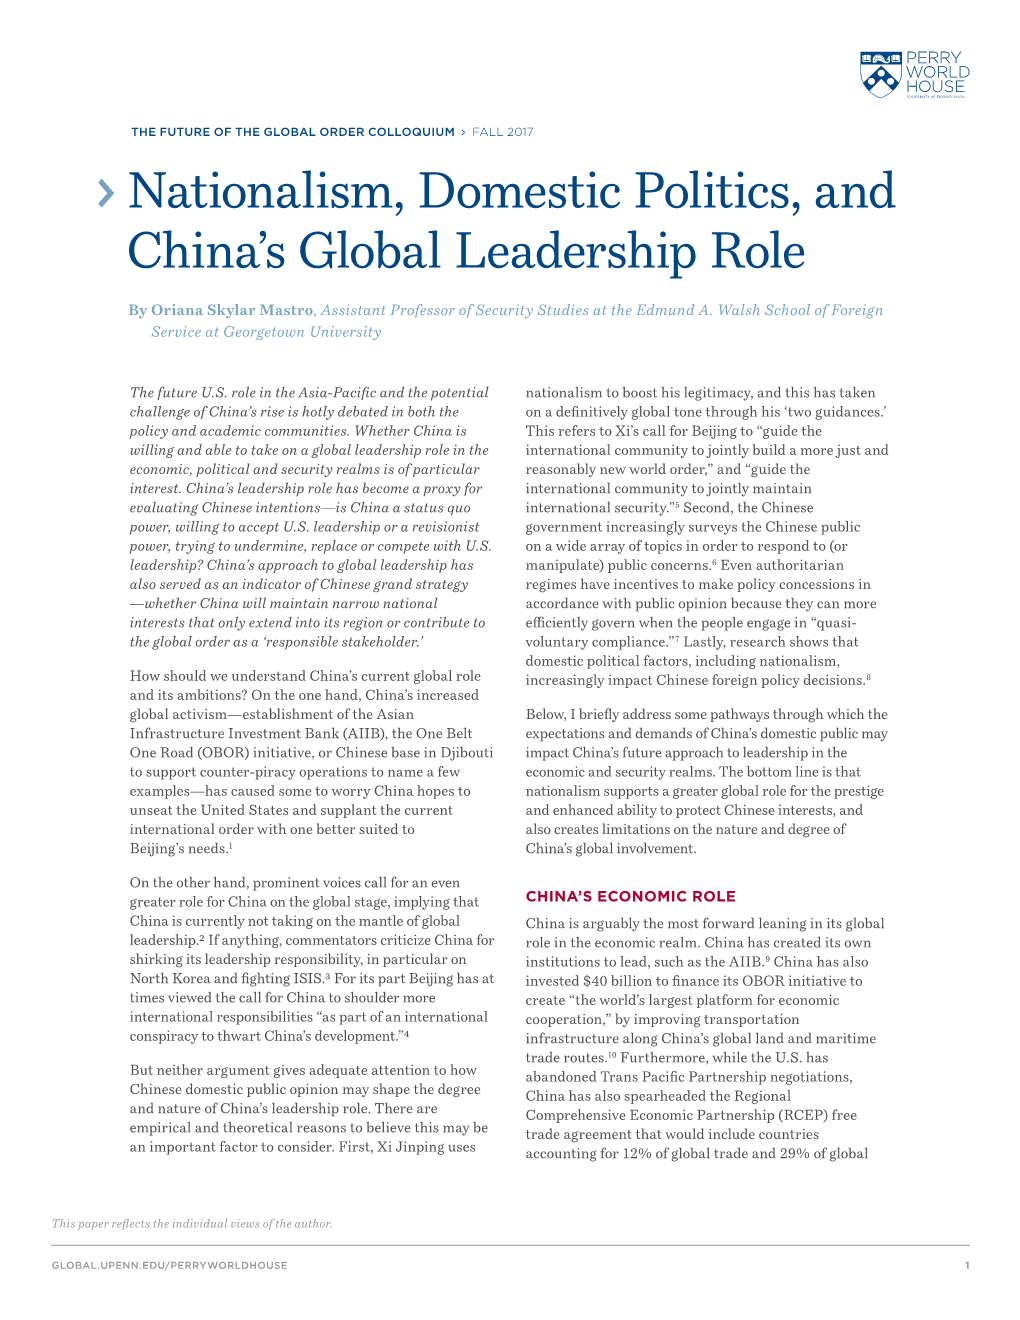 Nationalism, Domestic Politics, and China's Global Leadership Role